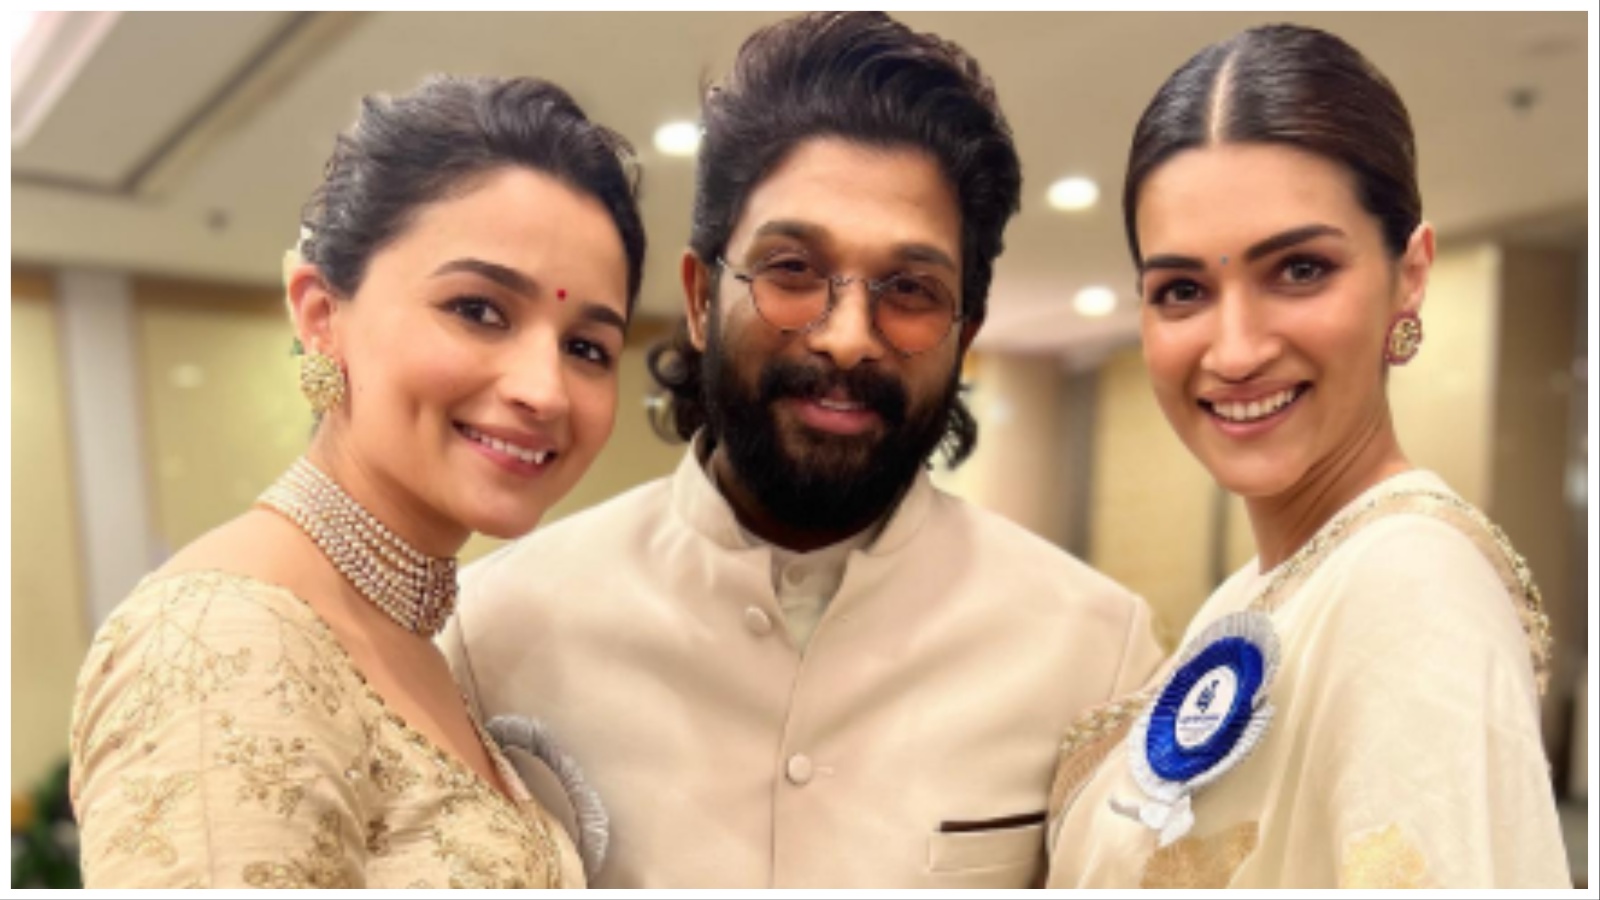 Kriti Sanon shares pics with Allu Arjun and Alia Bhatt from National  Awards: 'Happy faces sharing a proud moment' | Bollywood News - The Indian  Express